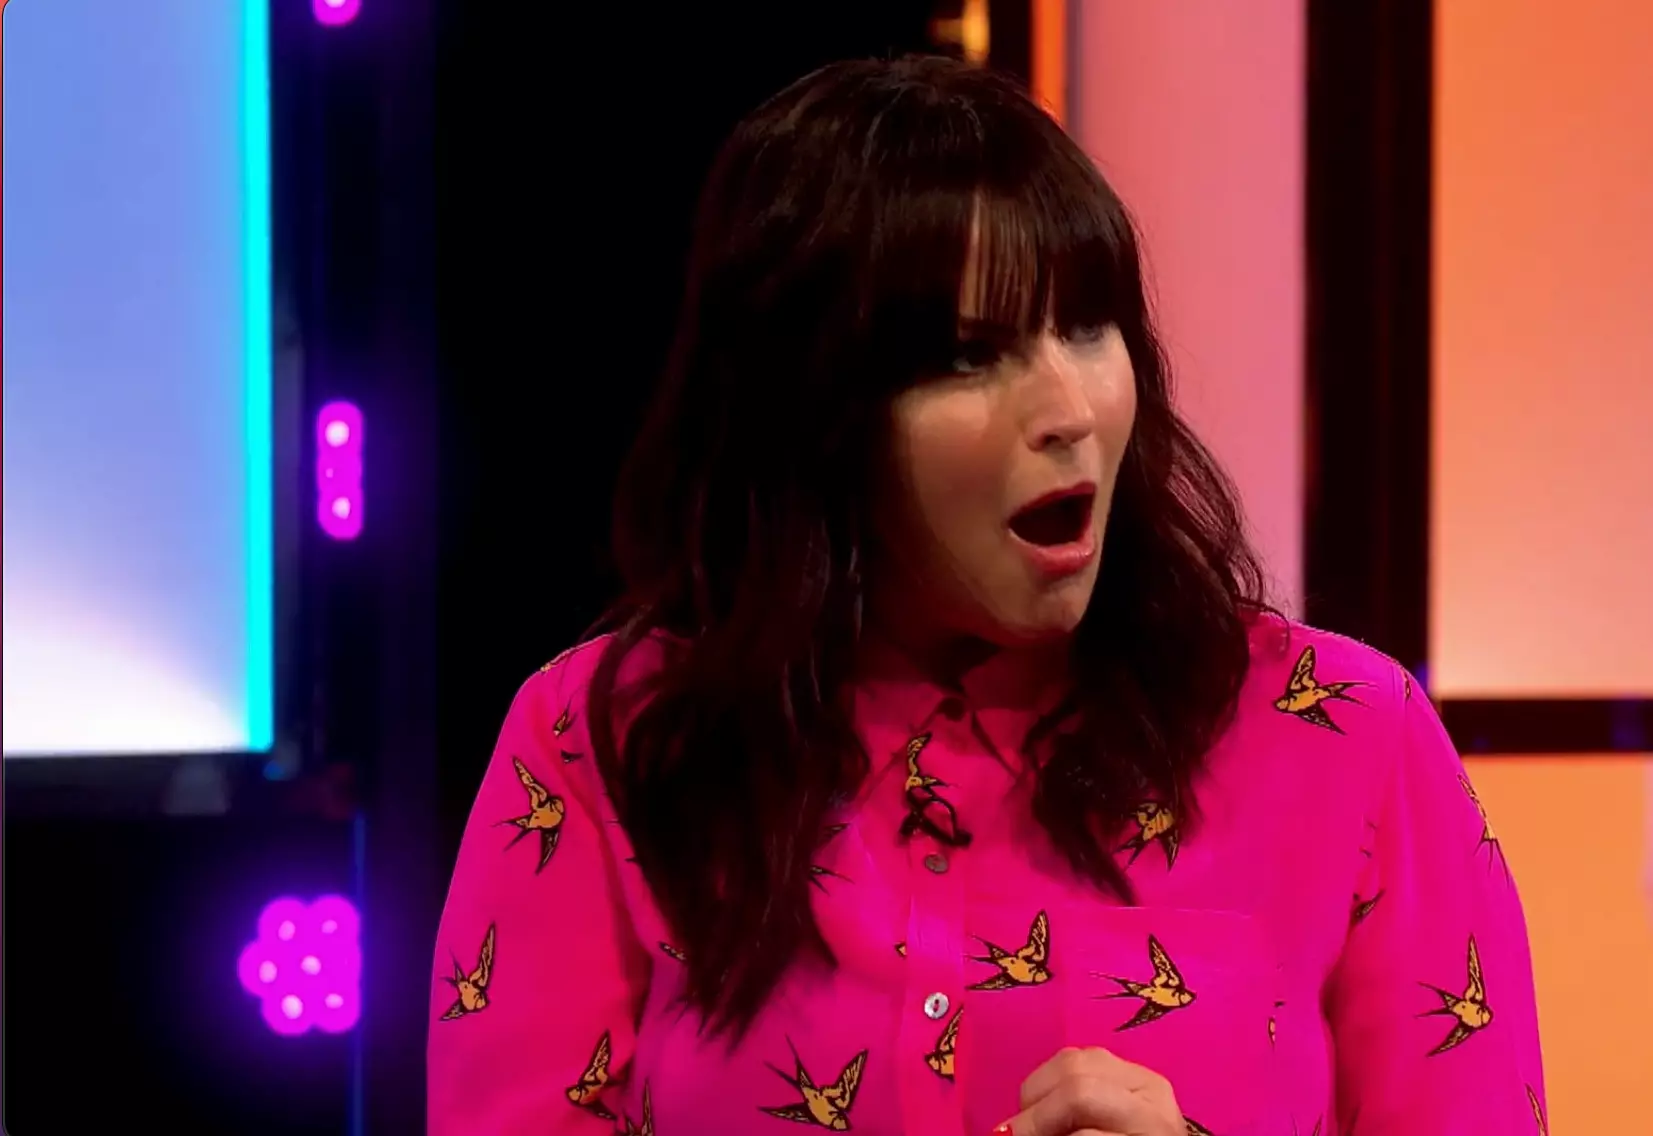 Anna Richardson was shocked to say the least (